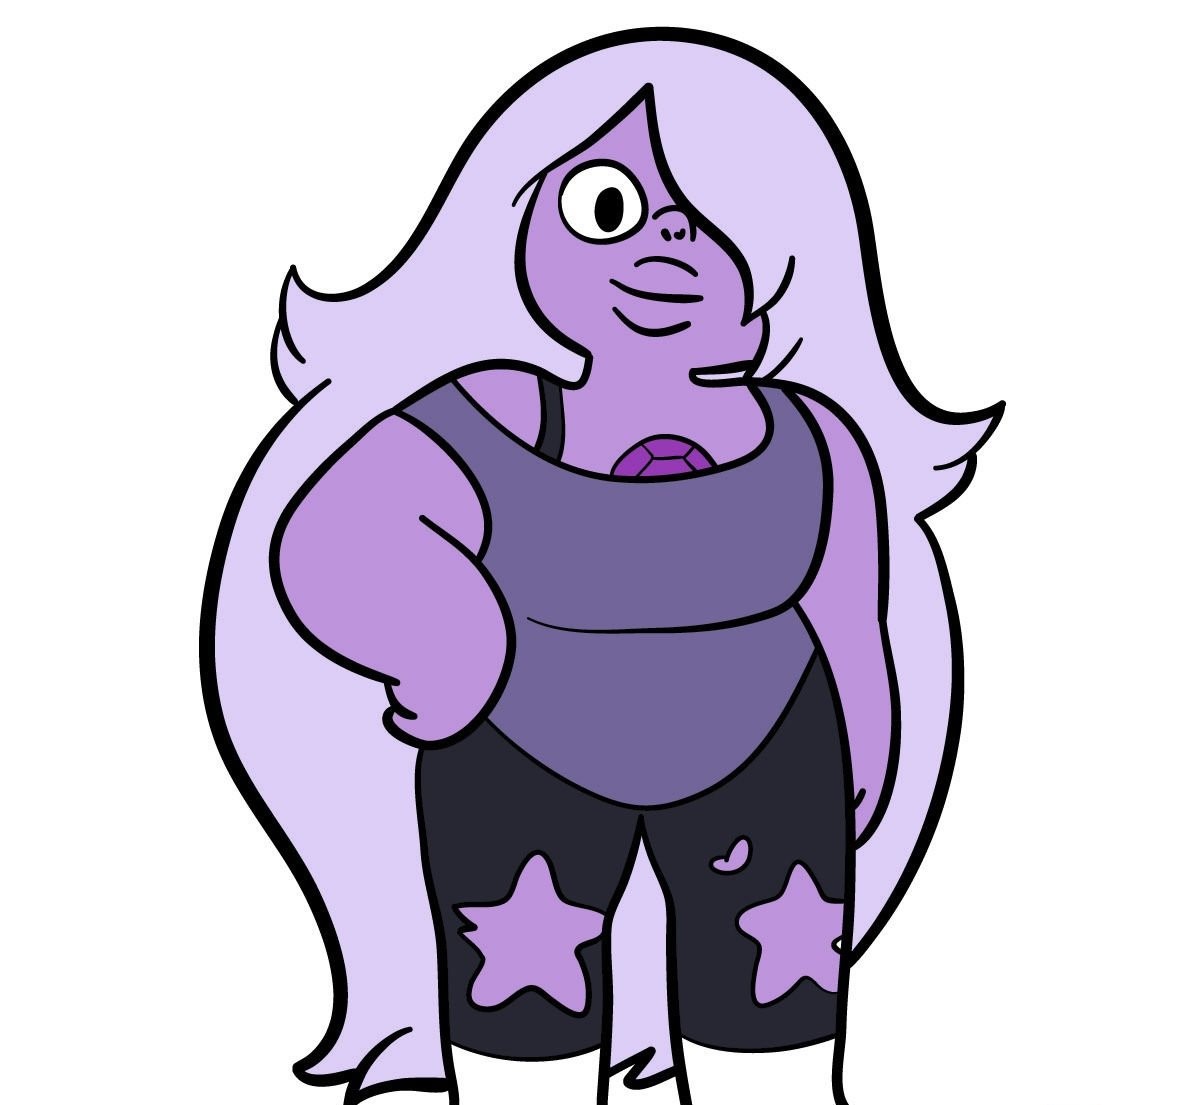 22 Facts About Amethyst (Steven Universe) - Facts.net